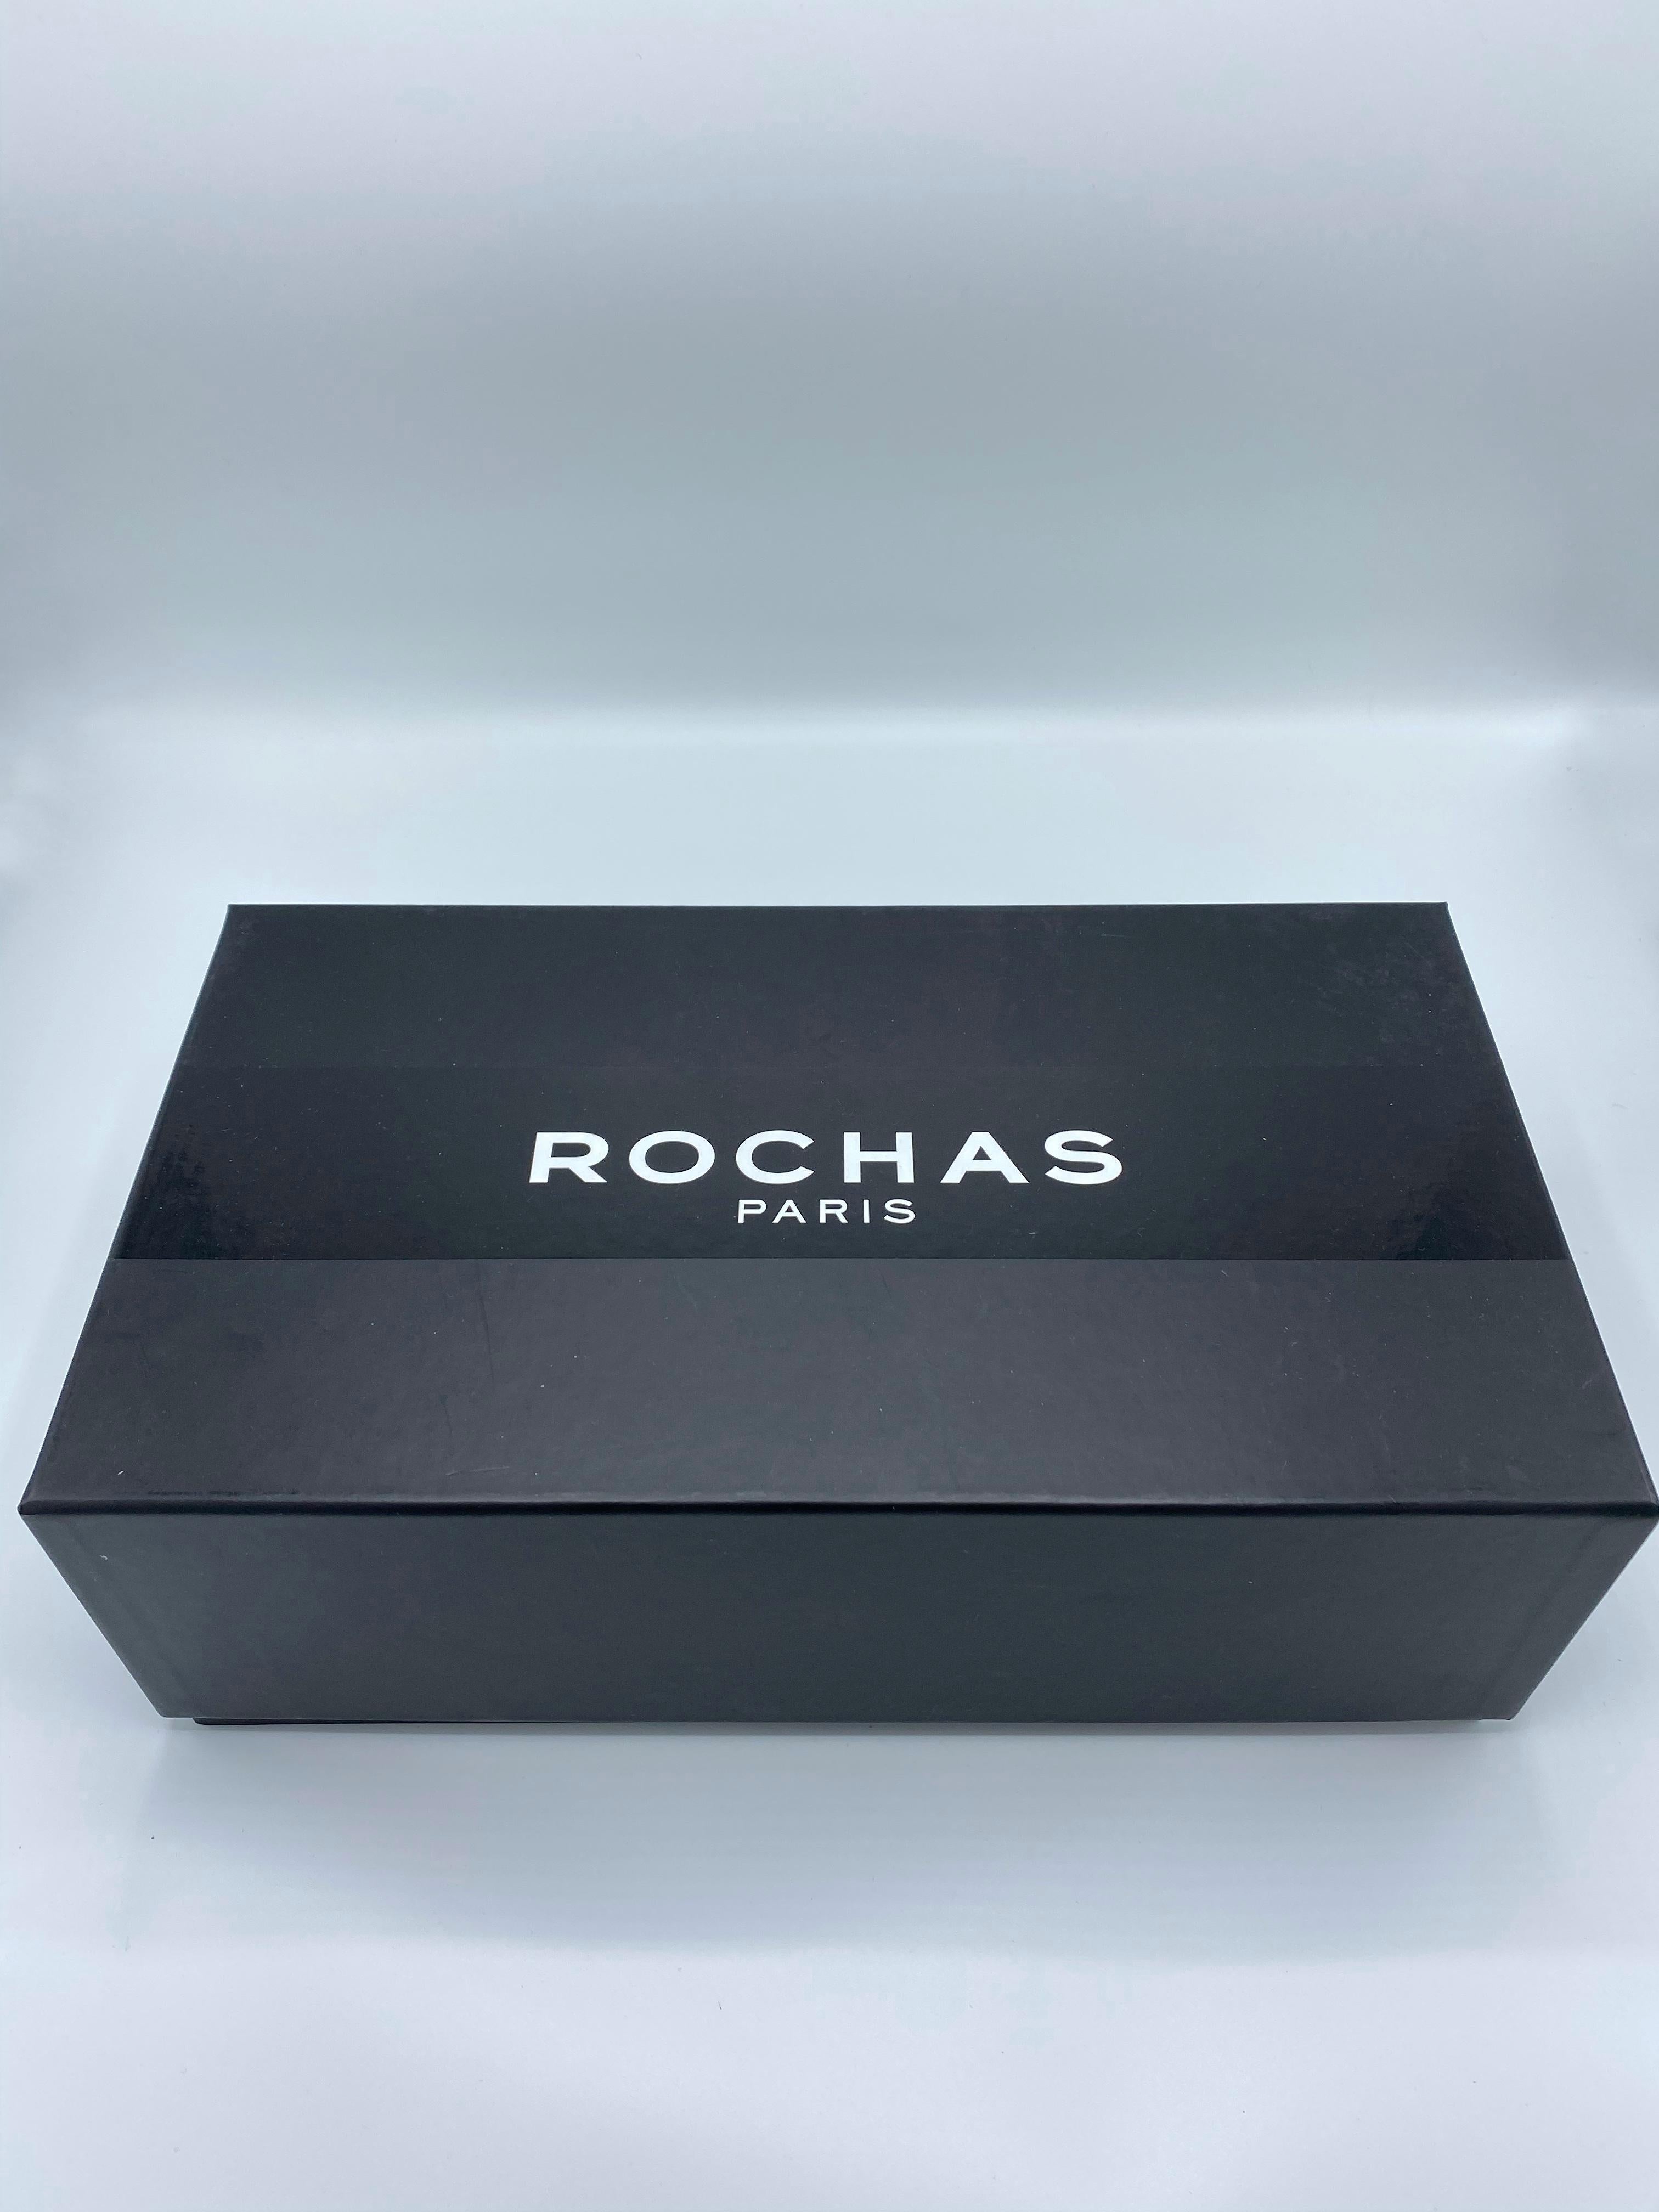 Rochas Paris Satin Grain and Black Pointed Toe Flats, Size 38.5 For Sale 7